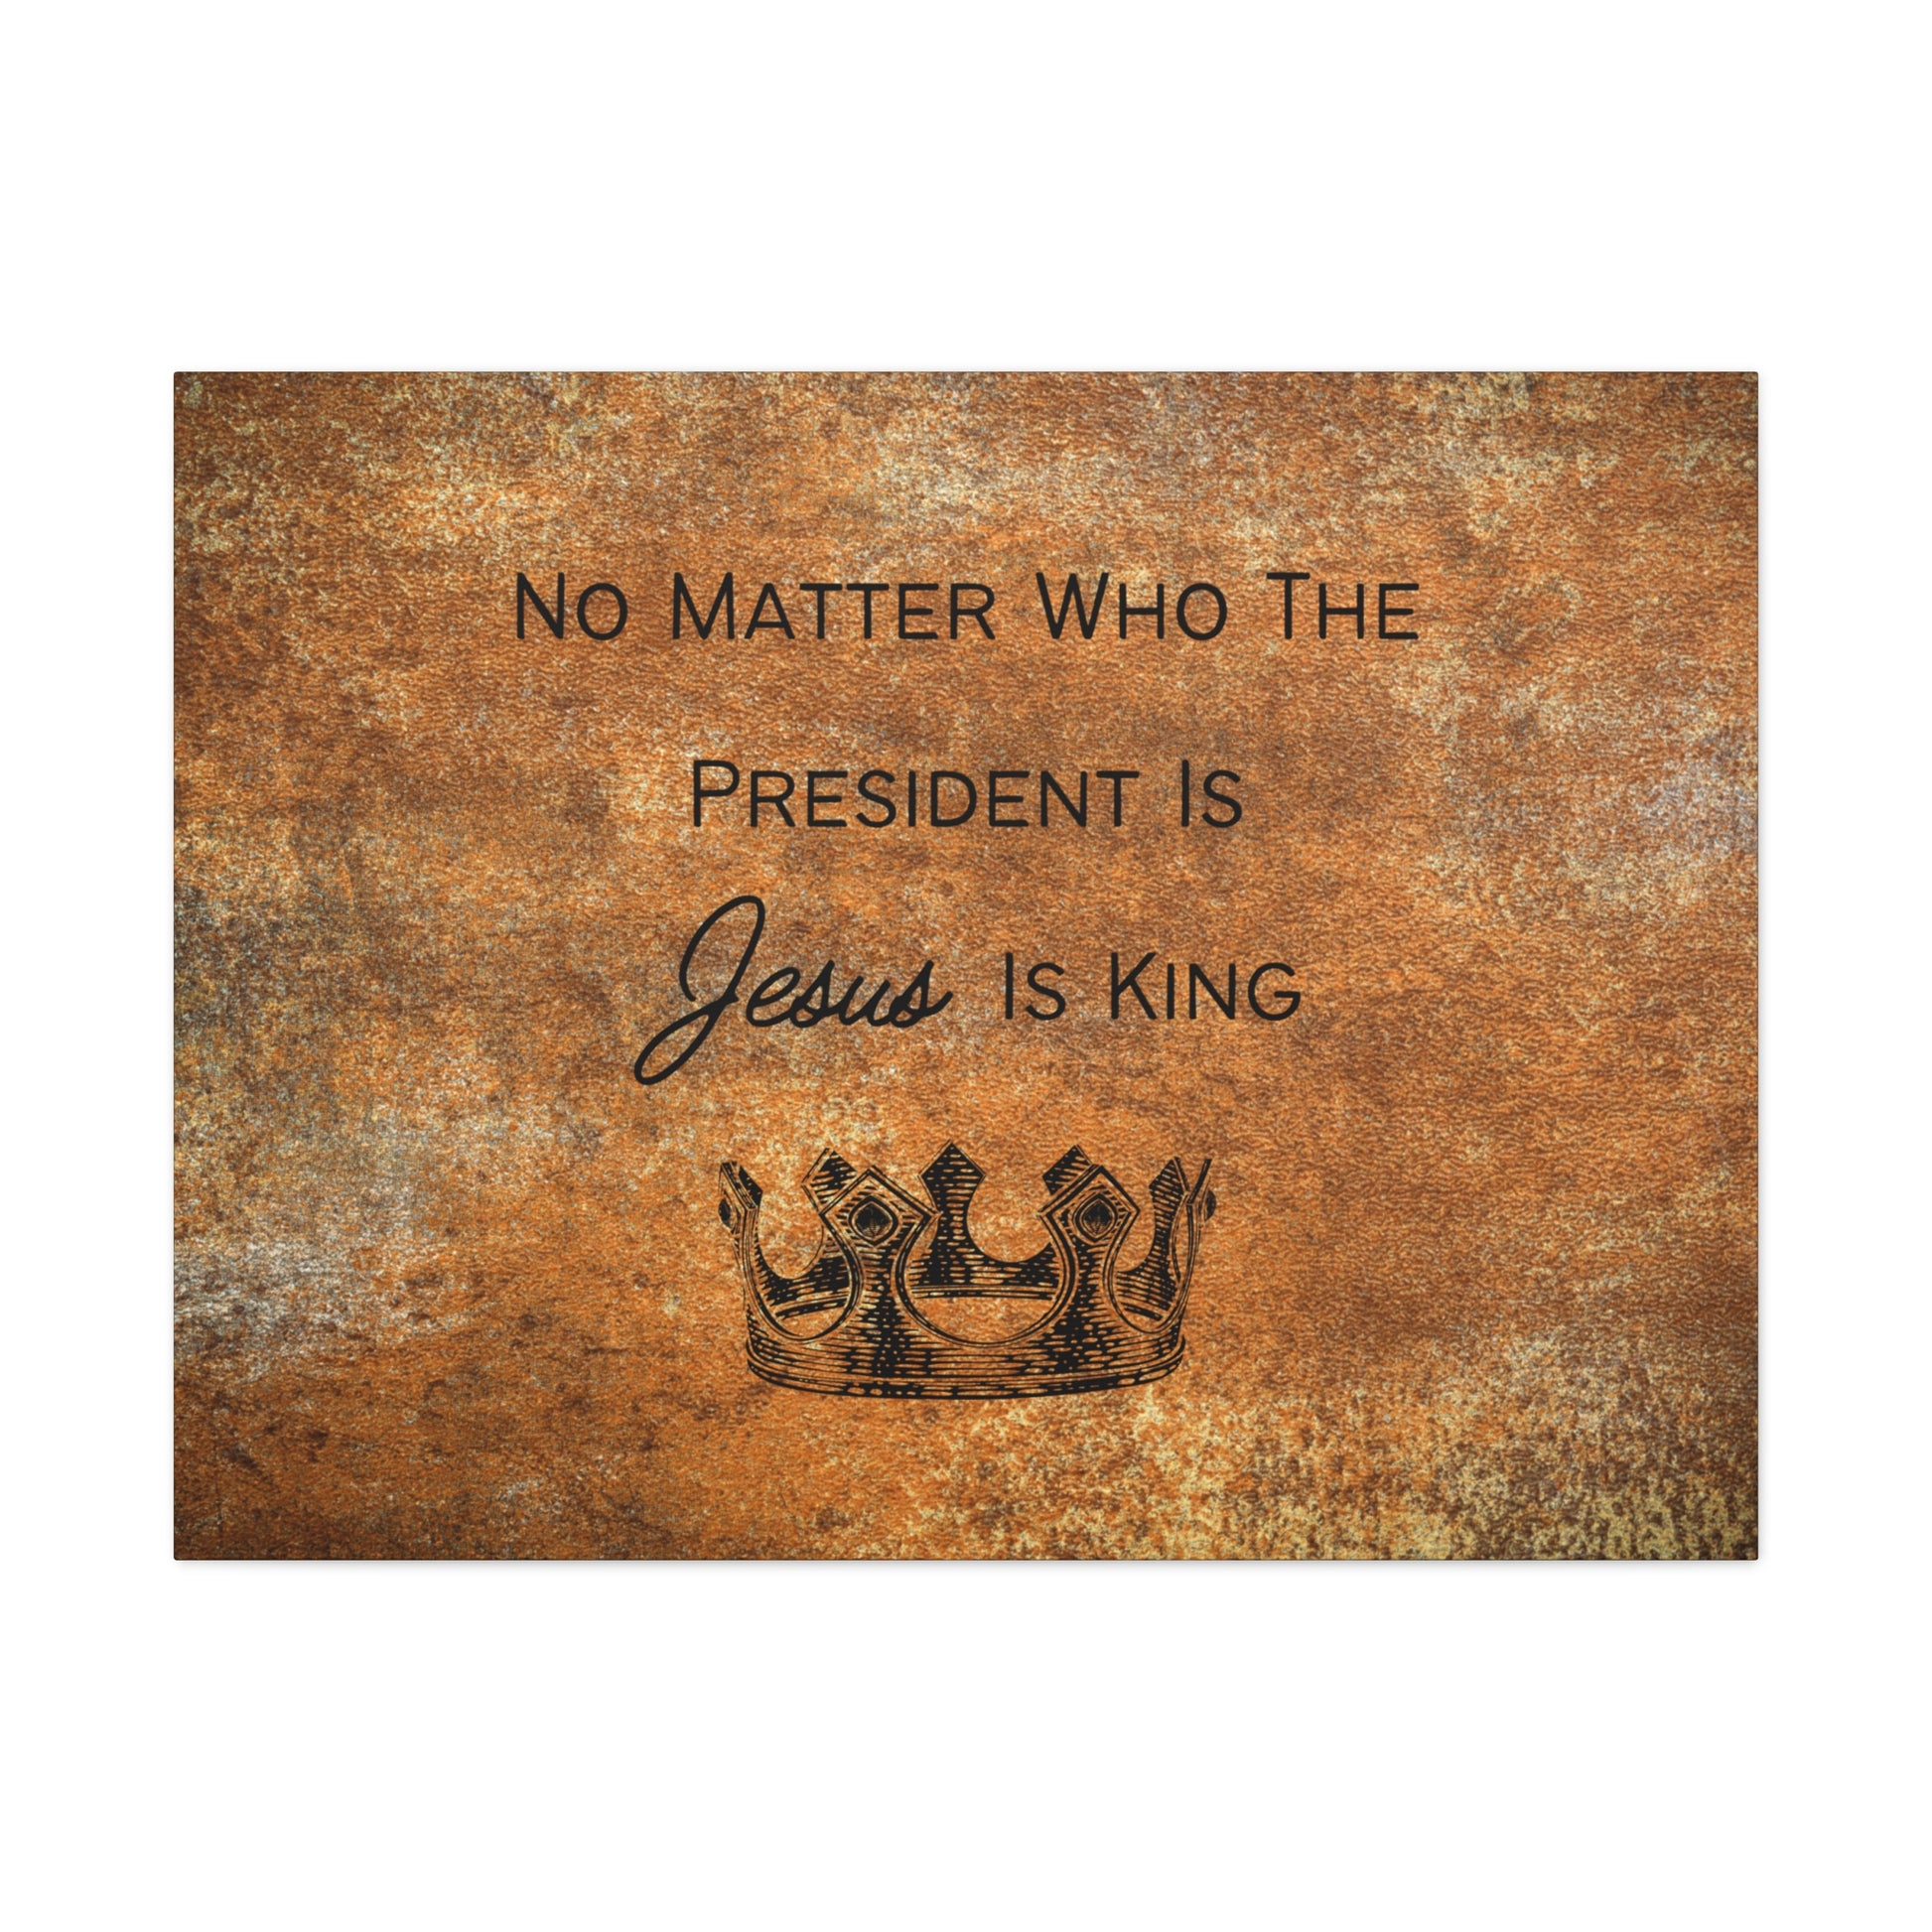 Bold white text on rustic background wall art, declaring Jesus's sovereignty.